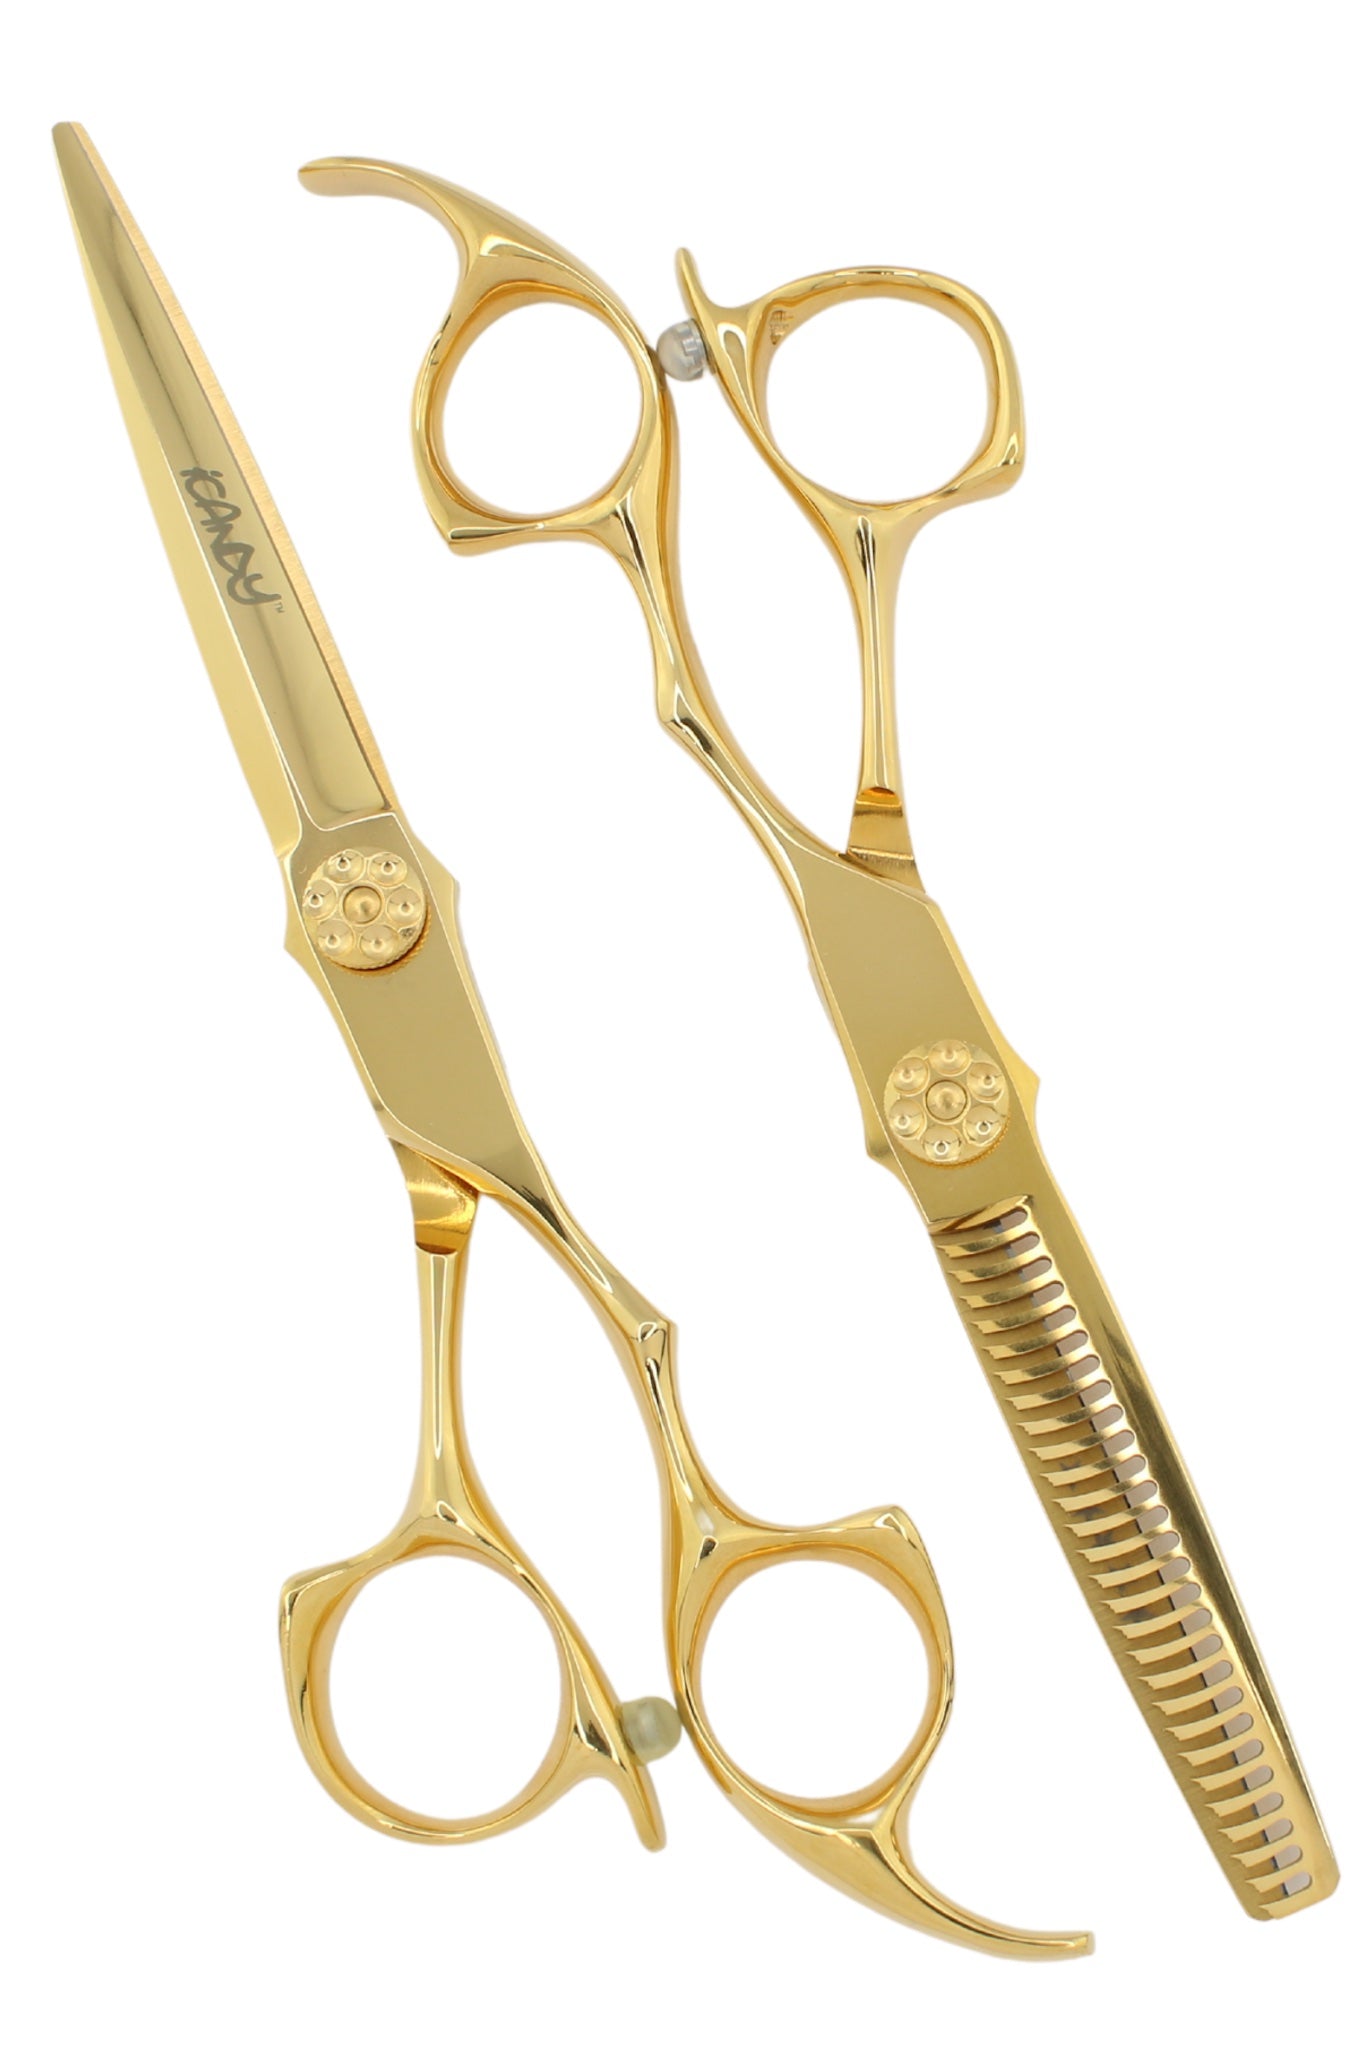 iCandy ALL STAR Yellow Gold Scissor-Thinner Bundle 6.5/6.0 inch 